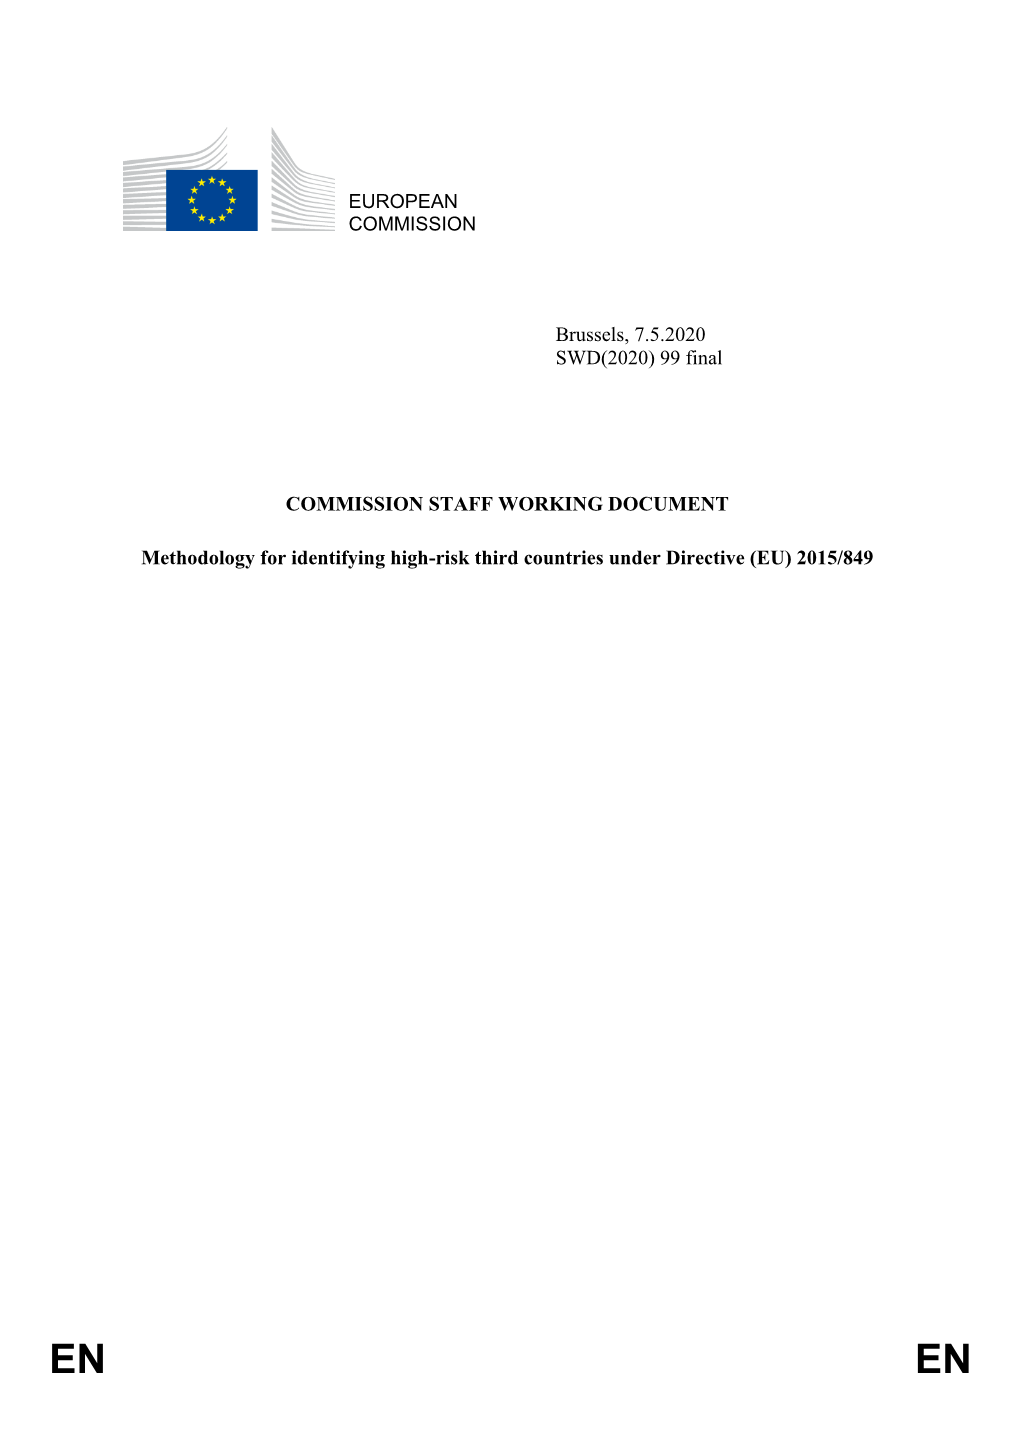 Methodology for Identifying High-Risk Third Countries Under Directive (EU) 2015/849